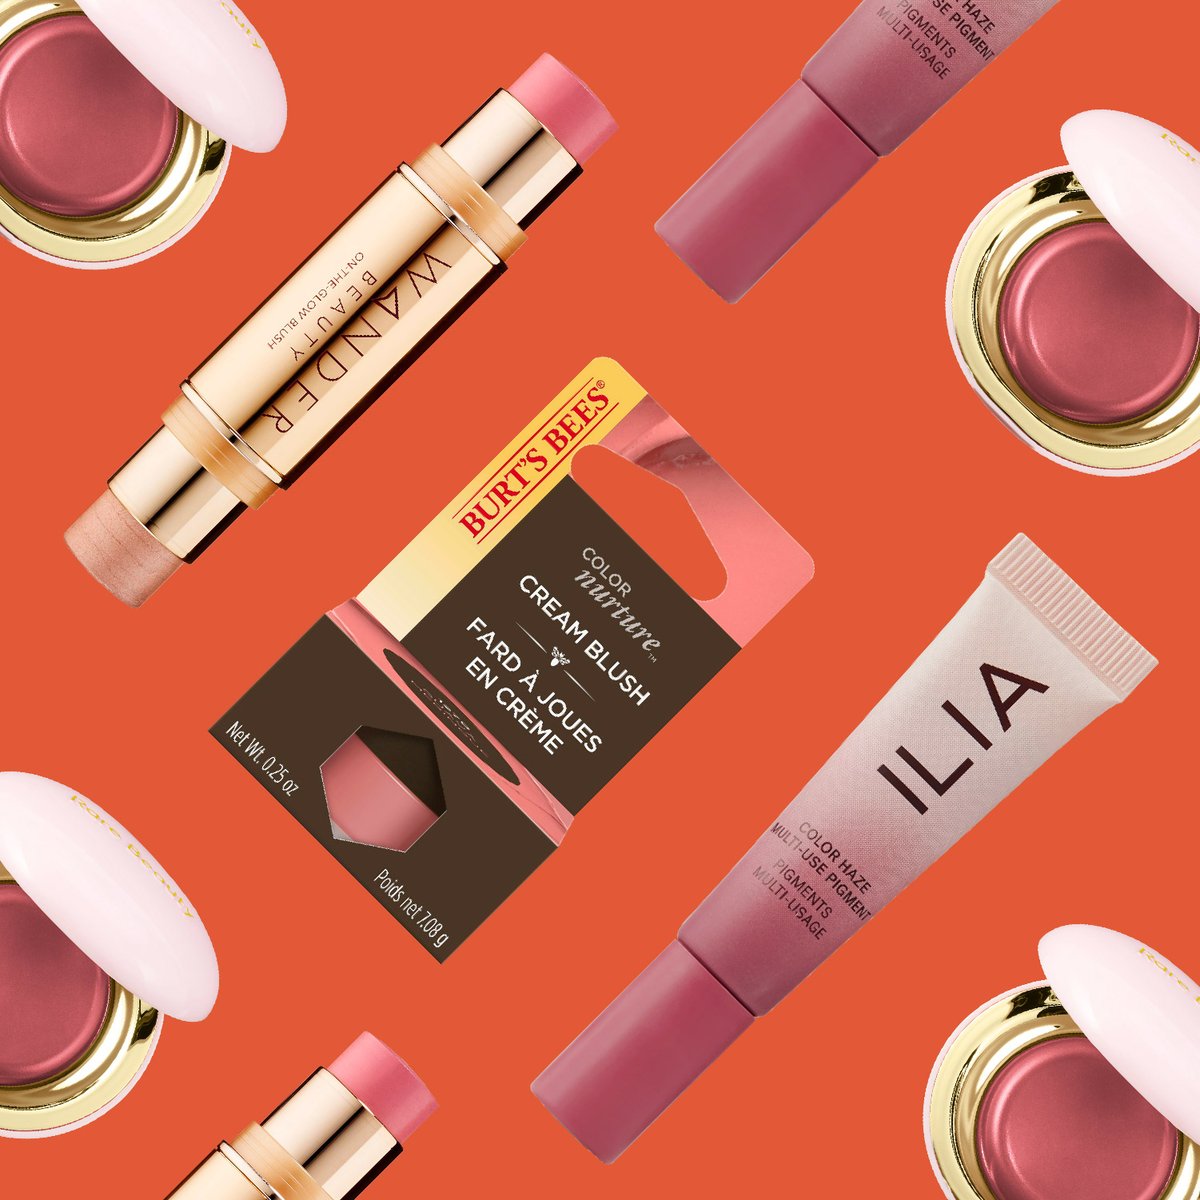 The best #creamblush gives a blendable flush of colour without feeling greasy! What are your favs? We 🧡 @wander_beauty @iliabeauty @BurtsBees @rarebeauty